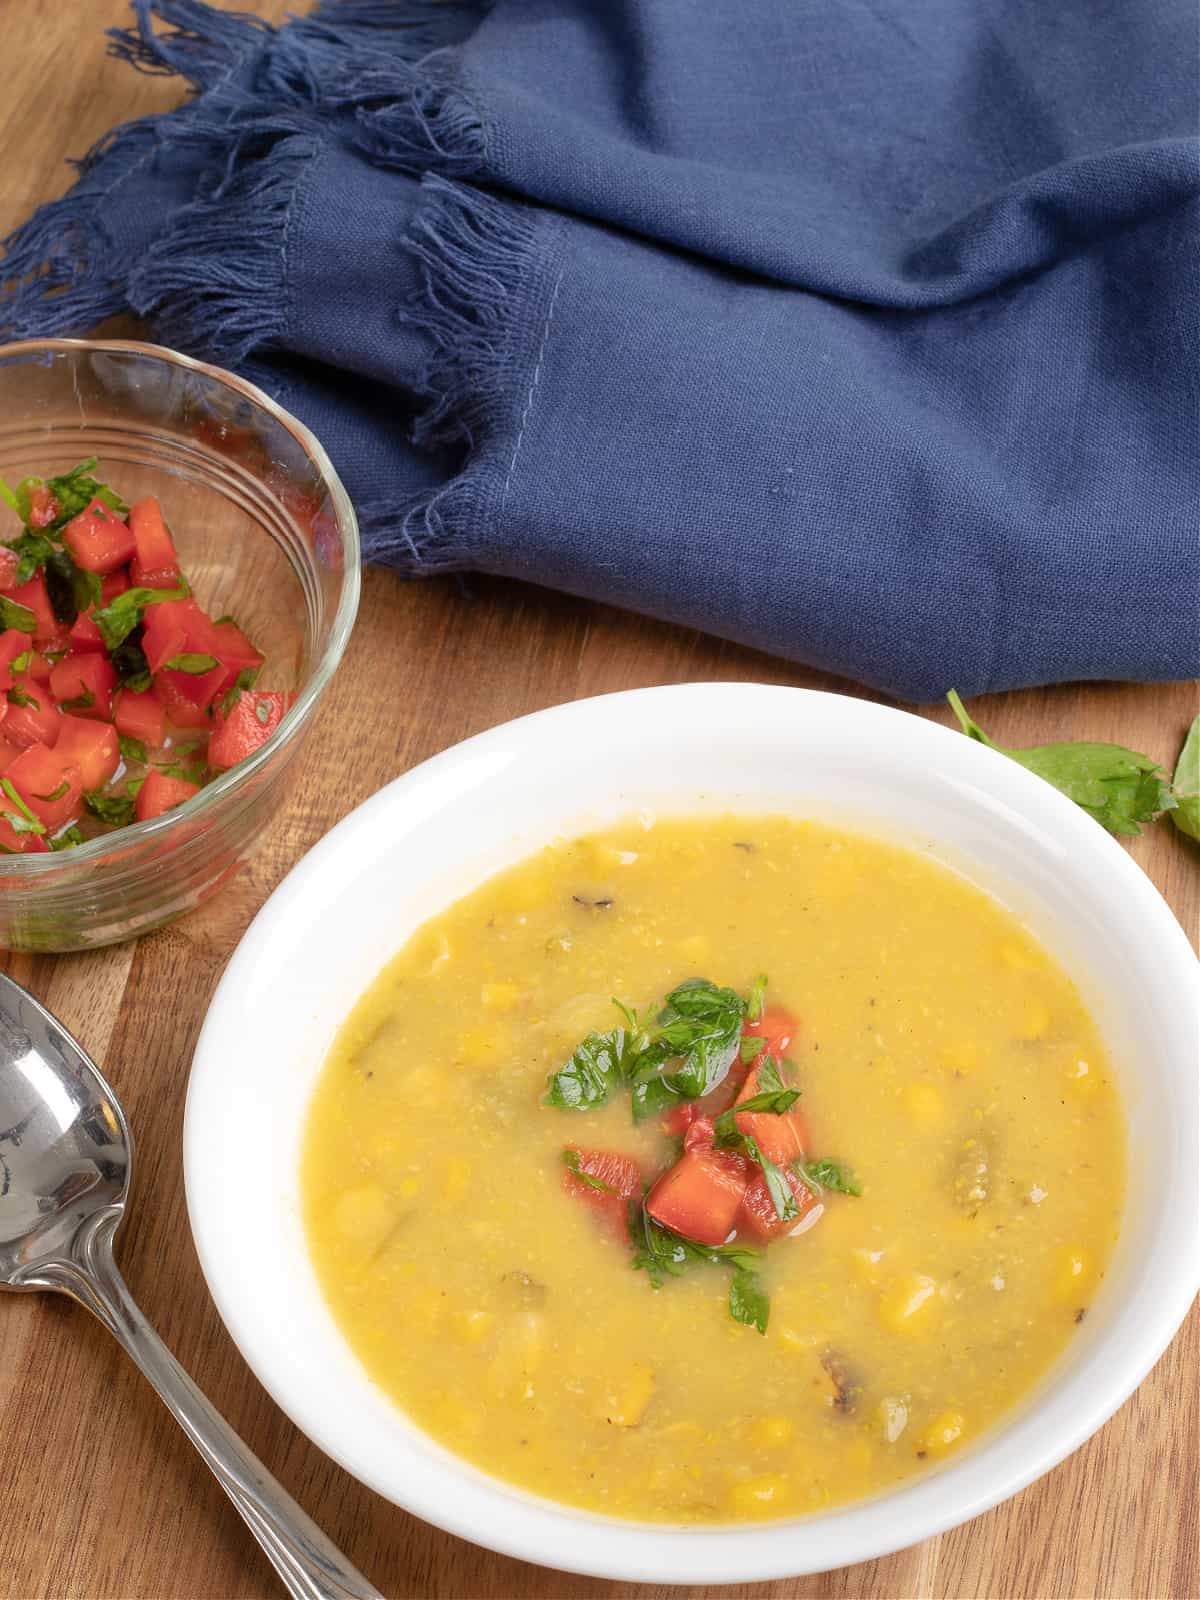 Bowl of southwestern squash and corn soup with a ramekin of red pepper relish